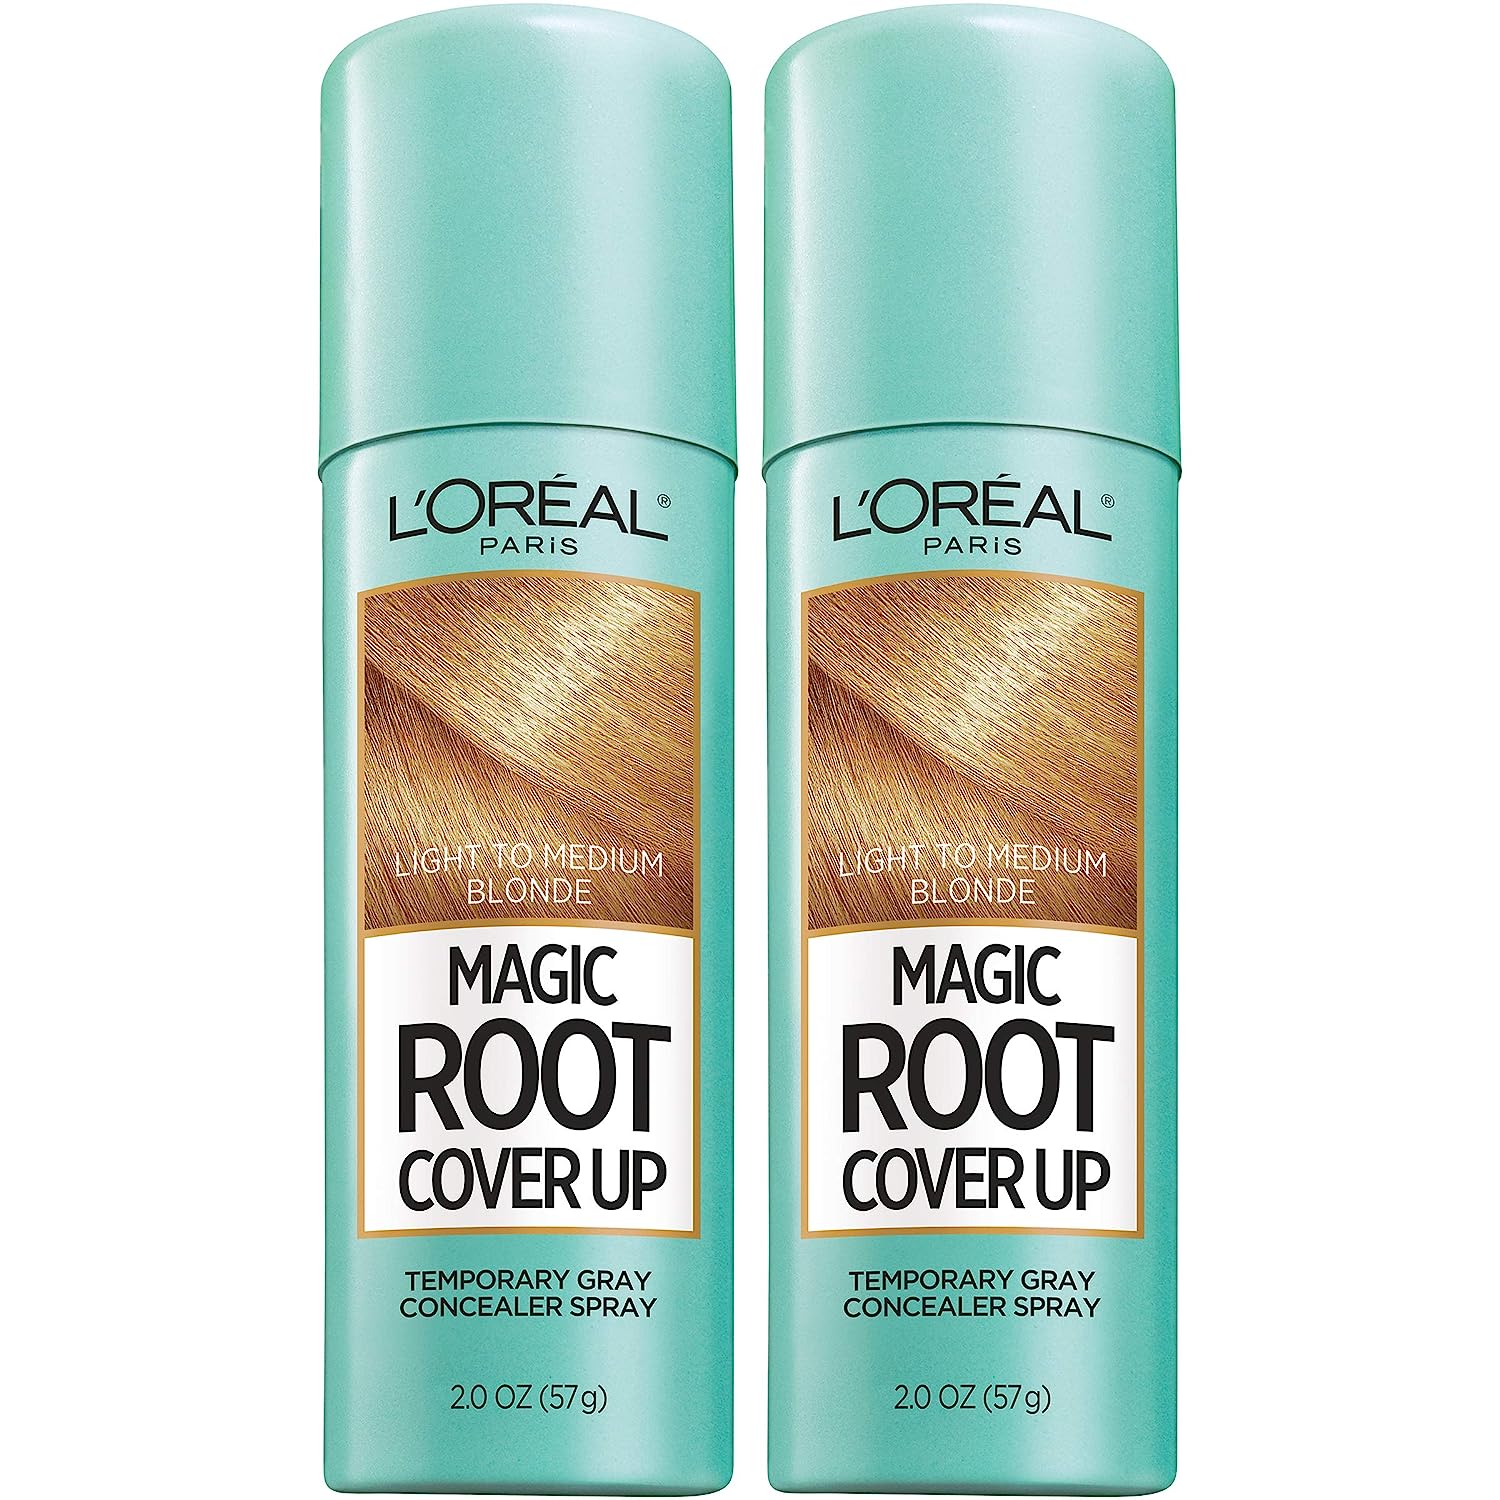 L'Oreal Paris Hair Color Magic Root Cover Up Temporary [...]